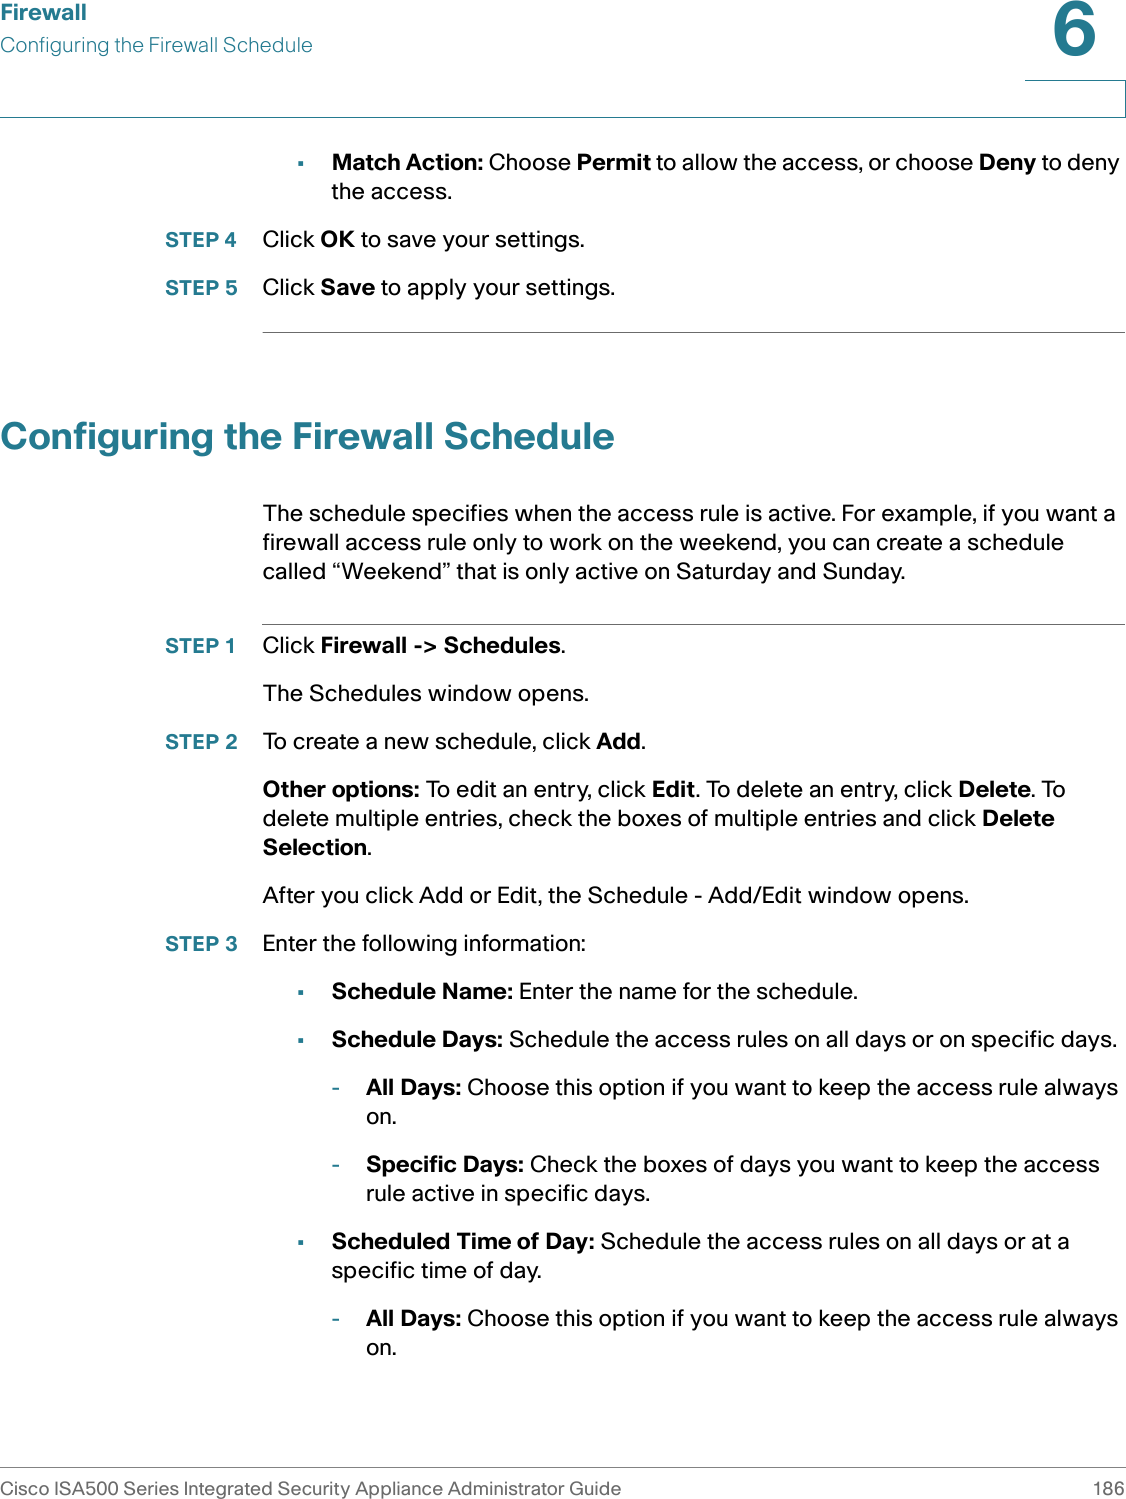 FirewallConfiguring the Firewall ScheduleCisco ISA500 Series Integrated Security Appliance Administrator Guide 1866 •Match Action: Choose Permit to allow the access, or choose Deny to deny the access. STEP 4 Click OK to save your settings.  STEP 5 Click Save to apply your settings. Configuring the Firewall ScheduleThe schedule specifies when the access rule is active. For example, if you want a firewall access rule only to work on the weekend, you can create a schedule called “Weekend” that is only active on Saturday and Sunday. STEP 1 Click Firewall -&gt; Schedules. The Schedules window opens. STEP 2 To create a new schedule, click Add.Other options: To edit an entry, click Edit. To delete an entry, click Delete. To delete multiple entries, check the boxes of multiple entries and click Delete Selection. After you click Add or Edit, the Schedule - Add/Edit window opens.STEP 3 Enter the following information:•Schedule Name: Enter the name for the schedule. •Schedule Days: Schedule the access rules on all days or on specific days. -All Days: Choose this option if you want to keep the access rule always on. -Specific Days: Check the boxes of days you want to keep the access rule active in specific days. •Scheduled Time of Day: Schedule the access rules on all days or at a specific time of day. -All Days: Choose this option if you want to keep the access rule always on. 